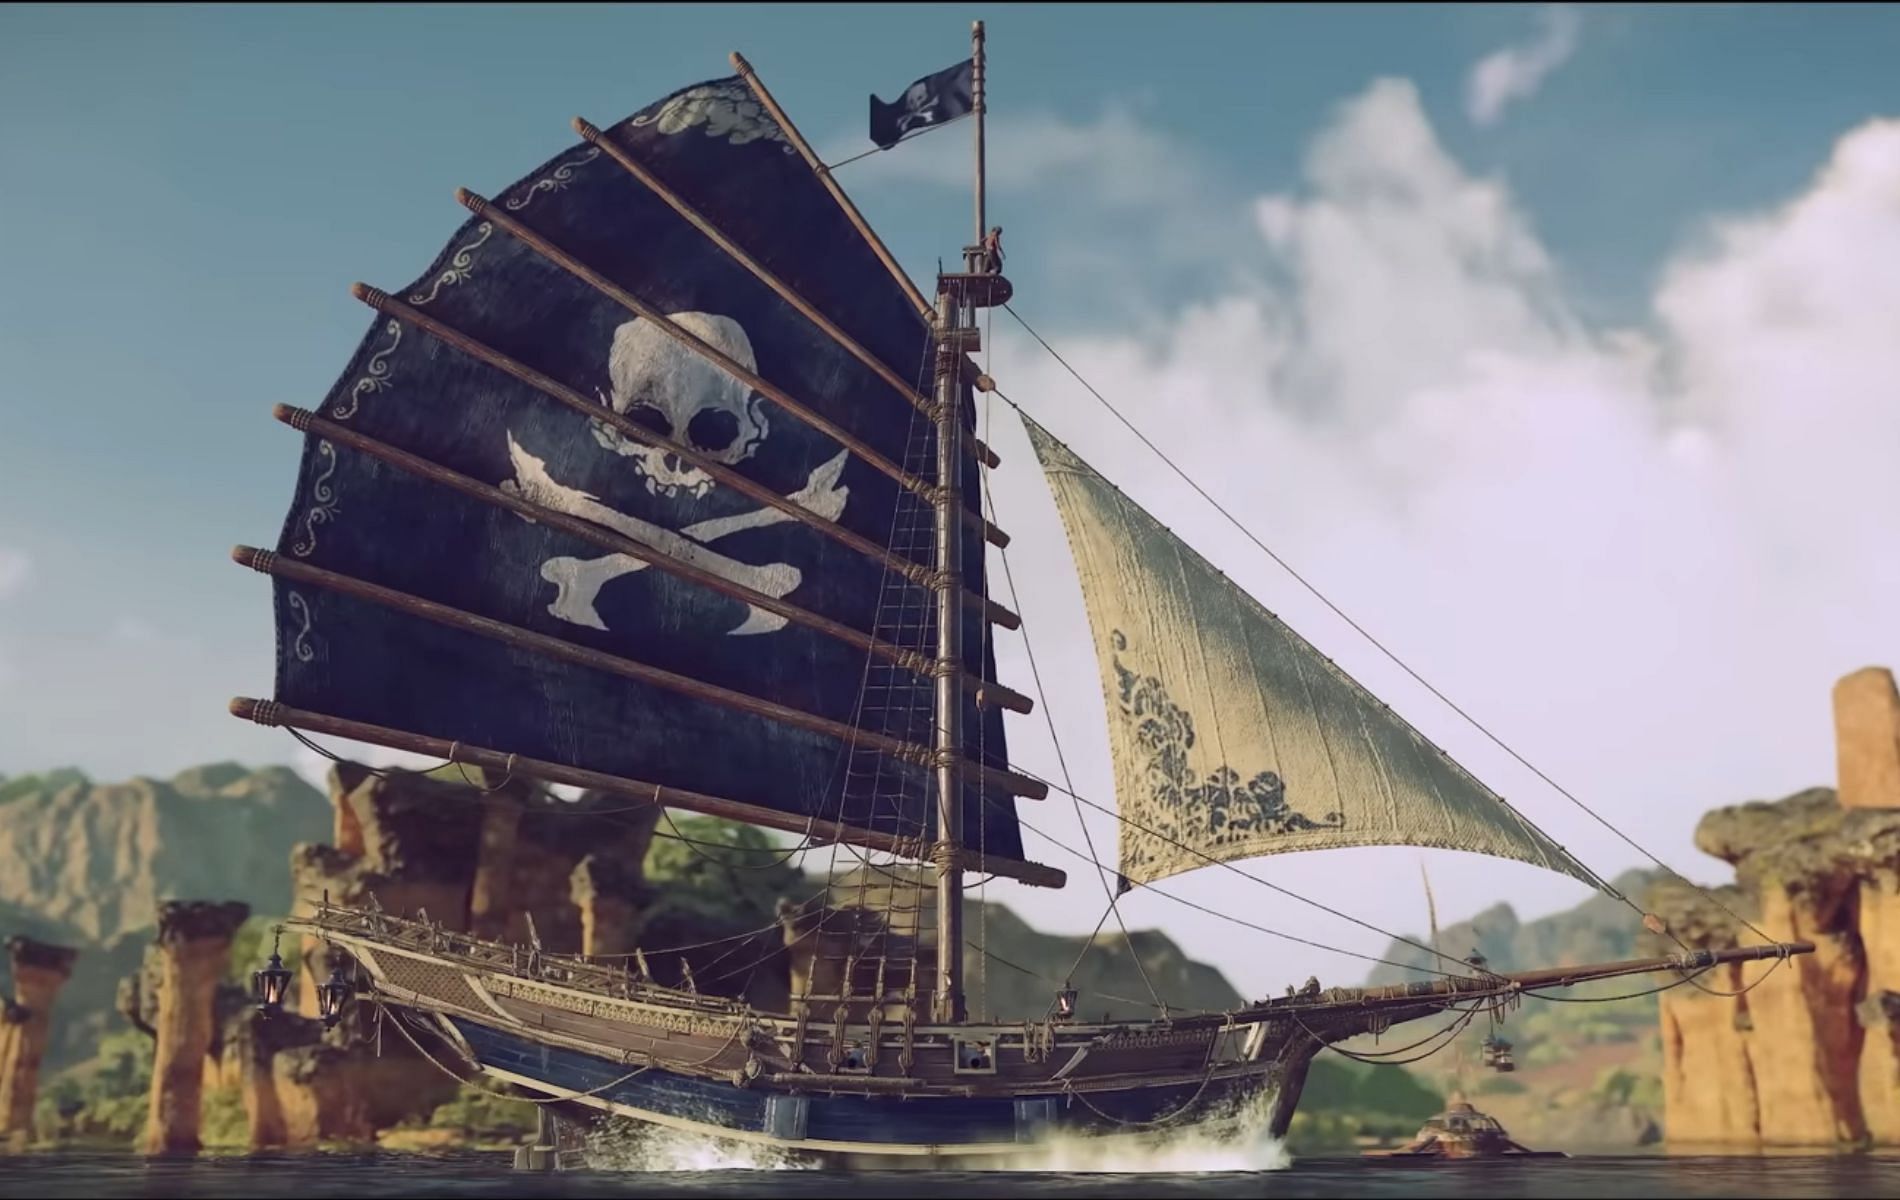 One of the many ships in Skull and Bones